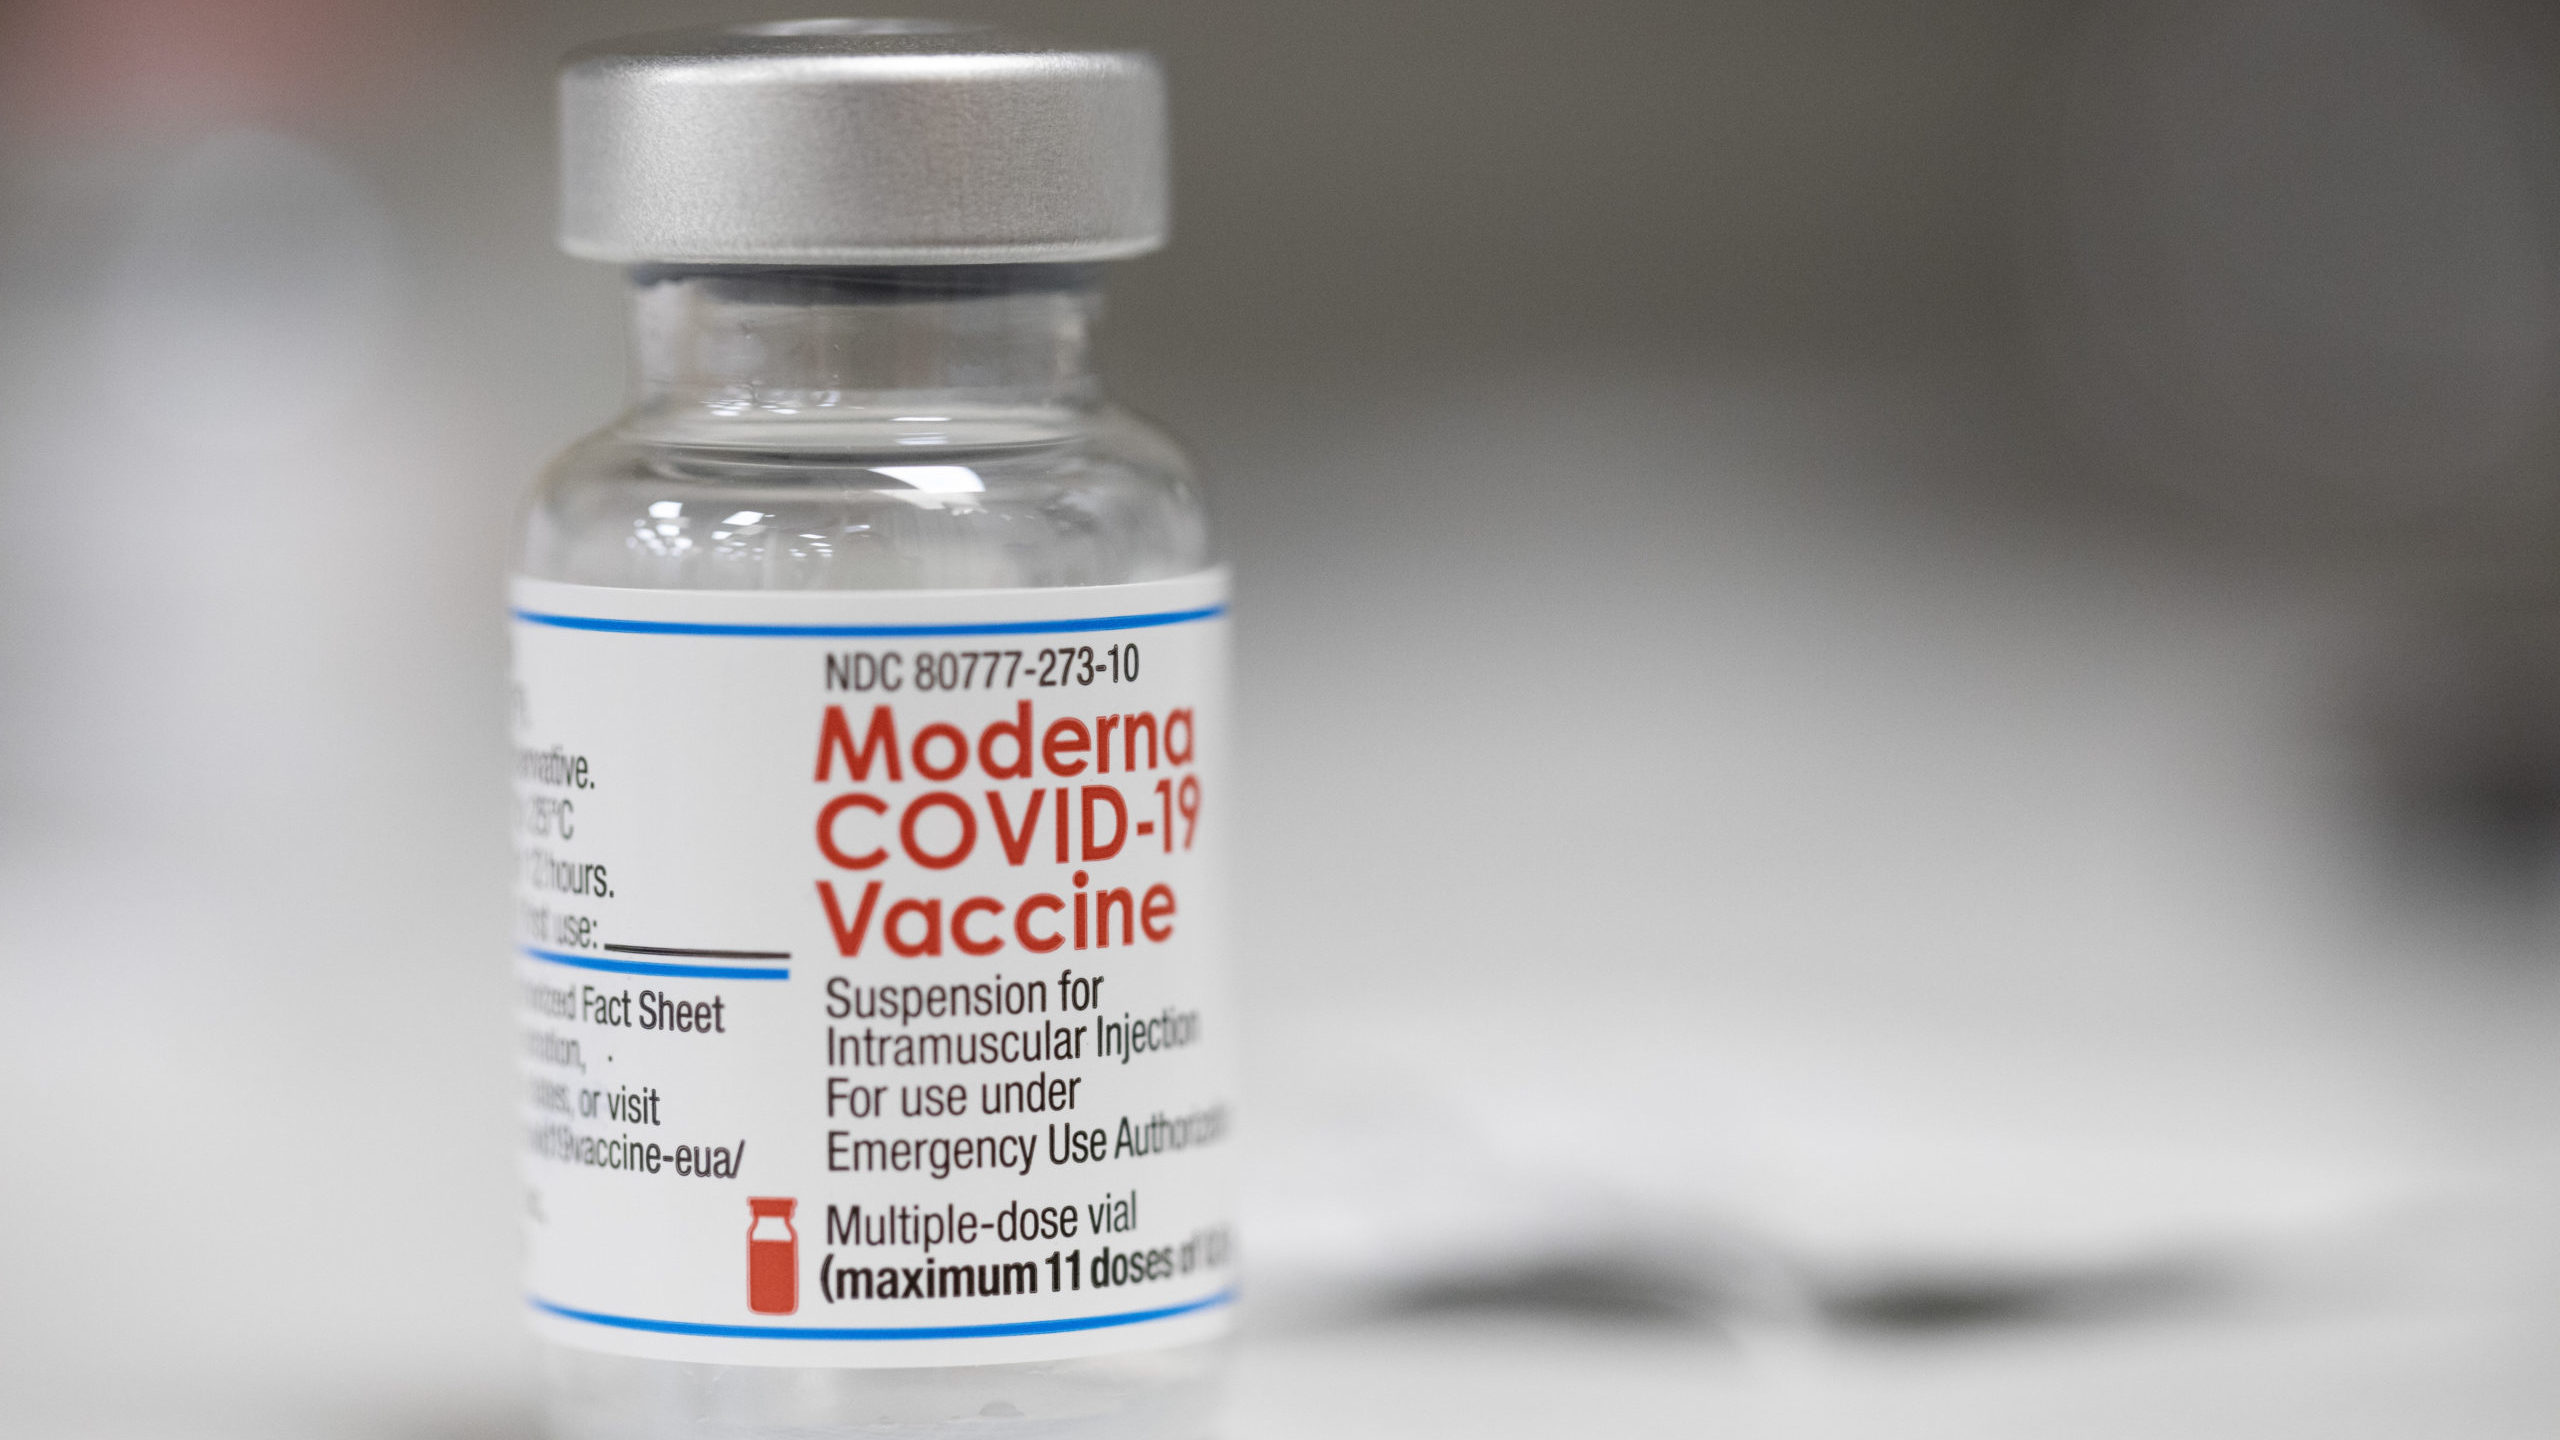 A vial of the Moderna COVID-19 vaccine is displayed on a counter at a pharmacy in Portland, Ore., M...